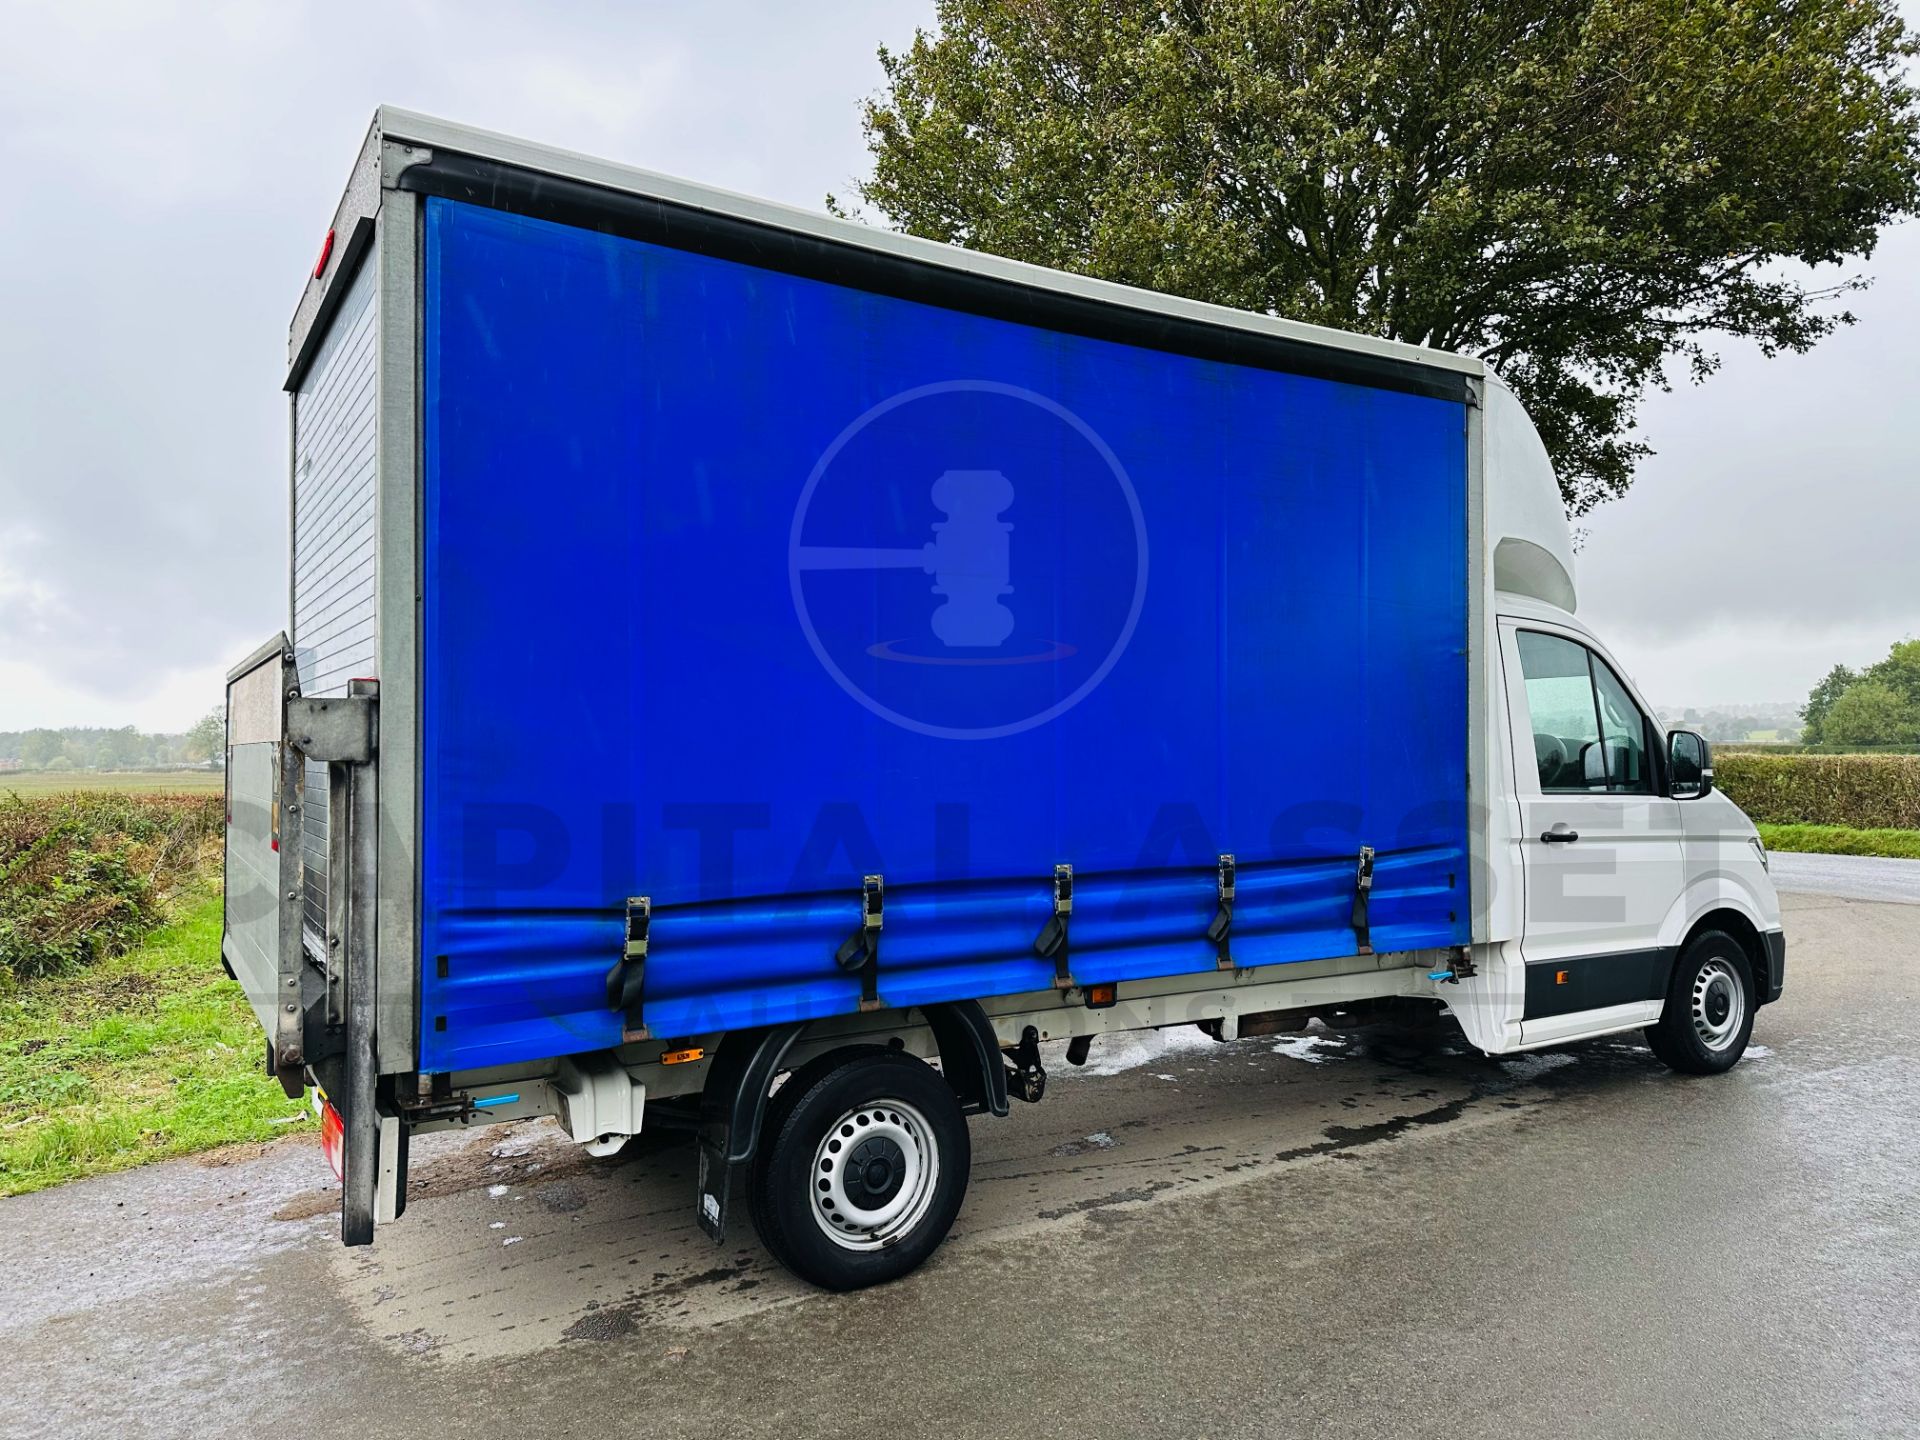 (On Sale) VOLKSWAGEN CRAFTER CR35 *LWB - CURTAIN SIDE* (69 REG - EURO 6) 2.0 TDI *EURO 6* (1 OWNER) - Image 12 of 26